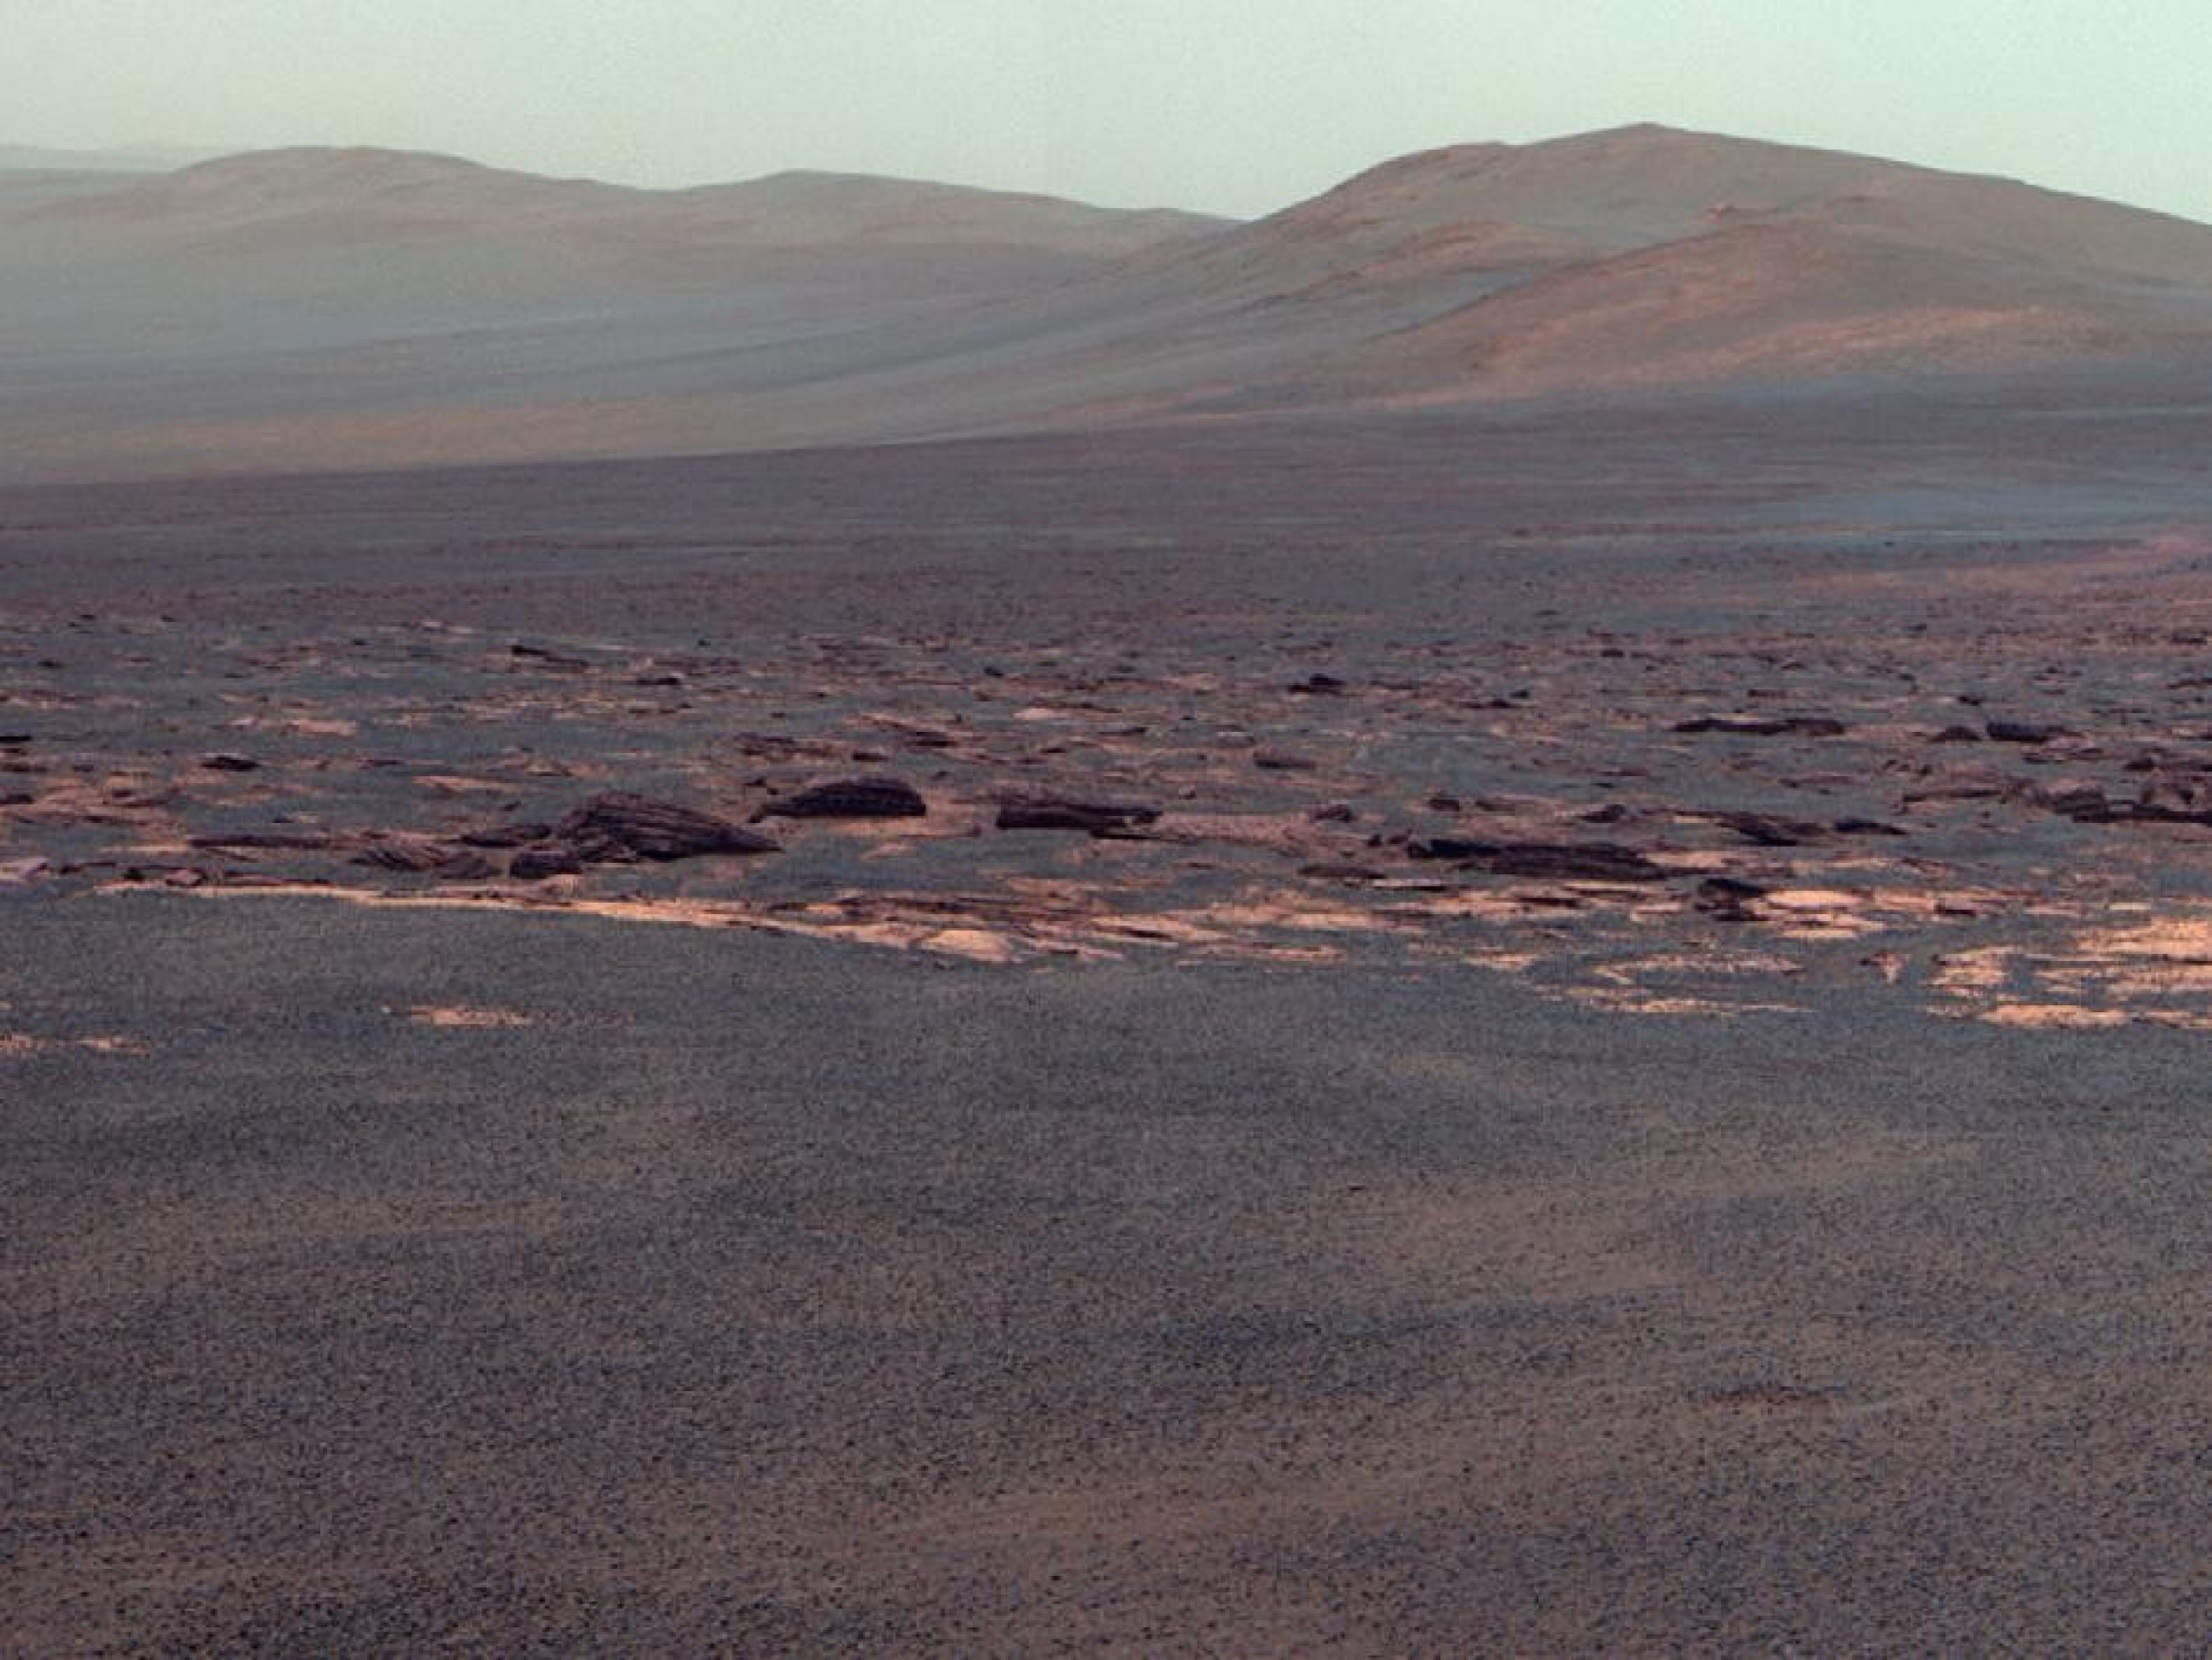 West Rim of Endeavour Crater on Mars 